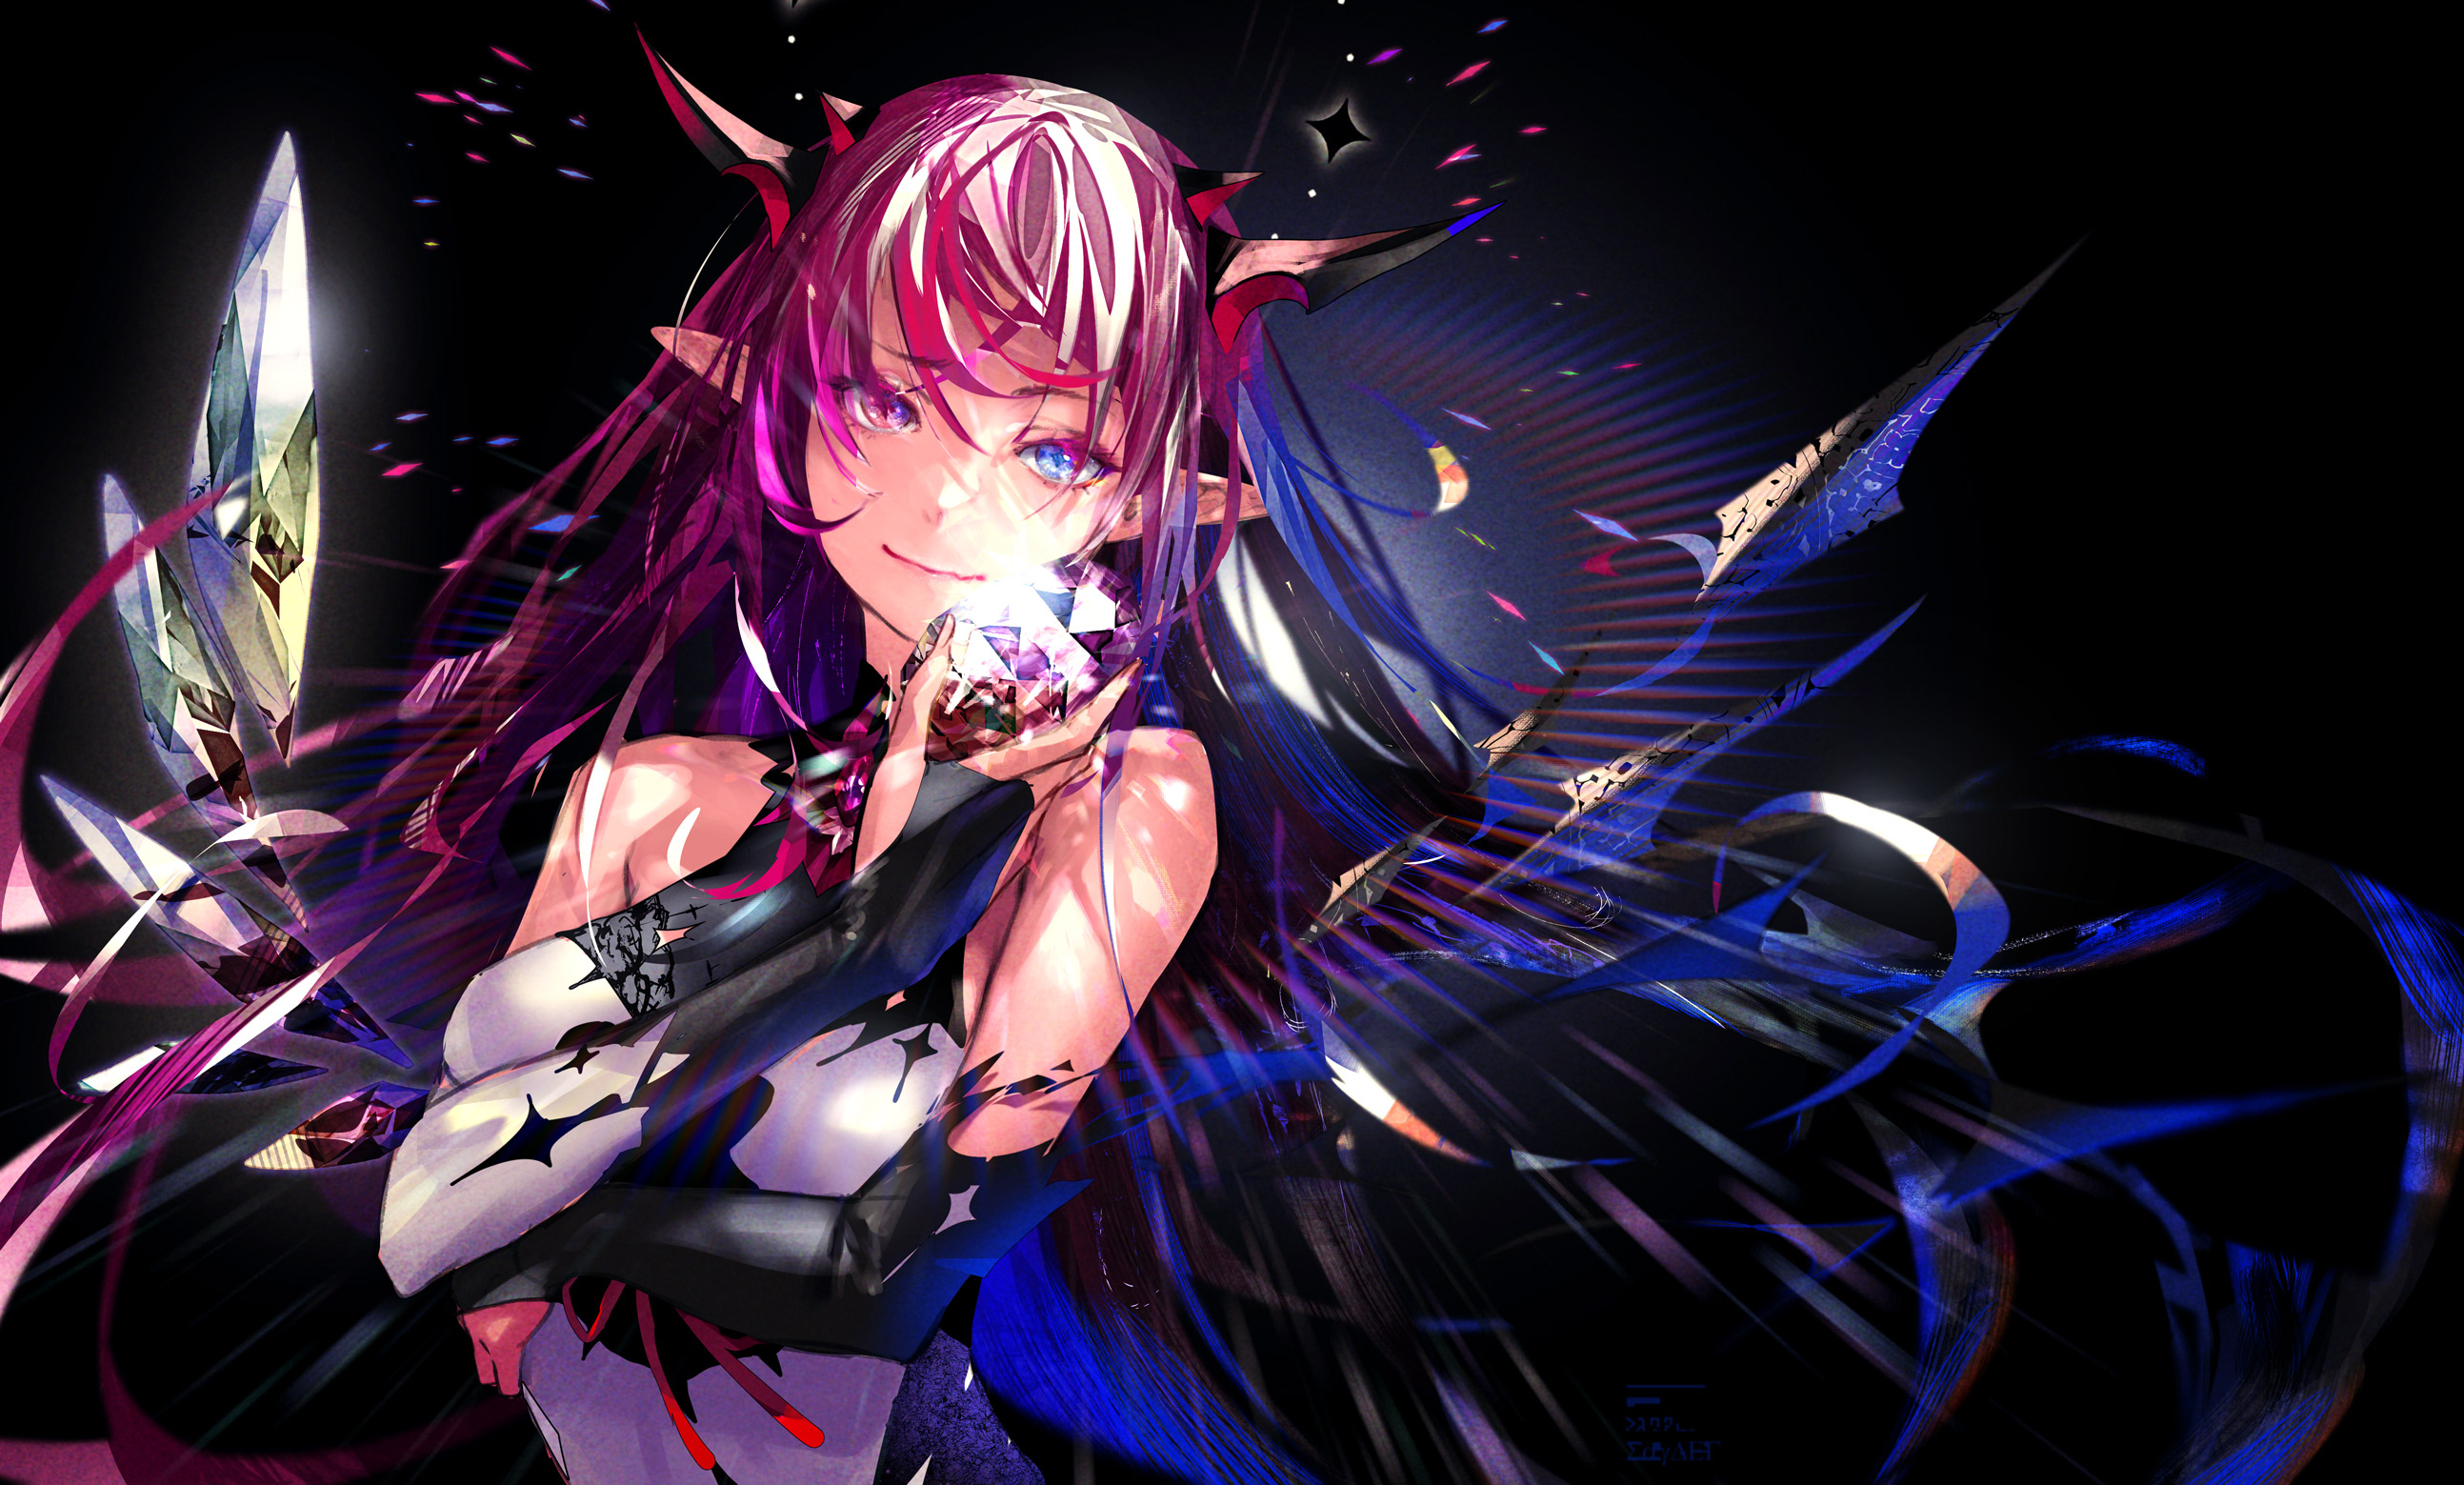 Anime 2587x1559 anime anime girls Hololive Virtual Youtuber IRyS (Hololive) Redjuice heterochromia pointy ears two tone hair smiling